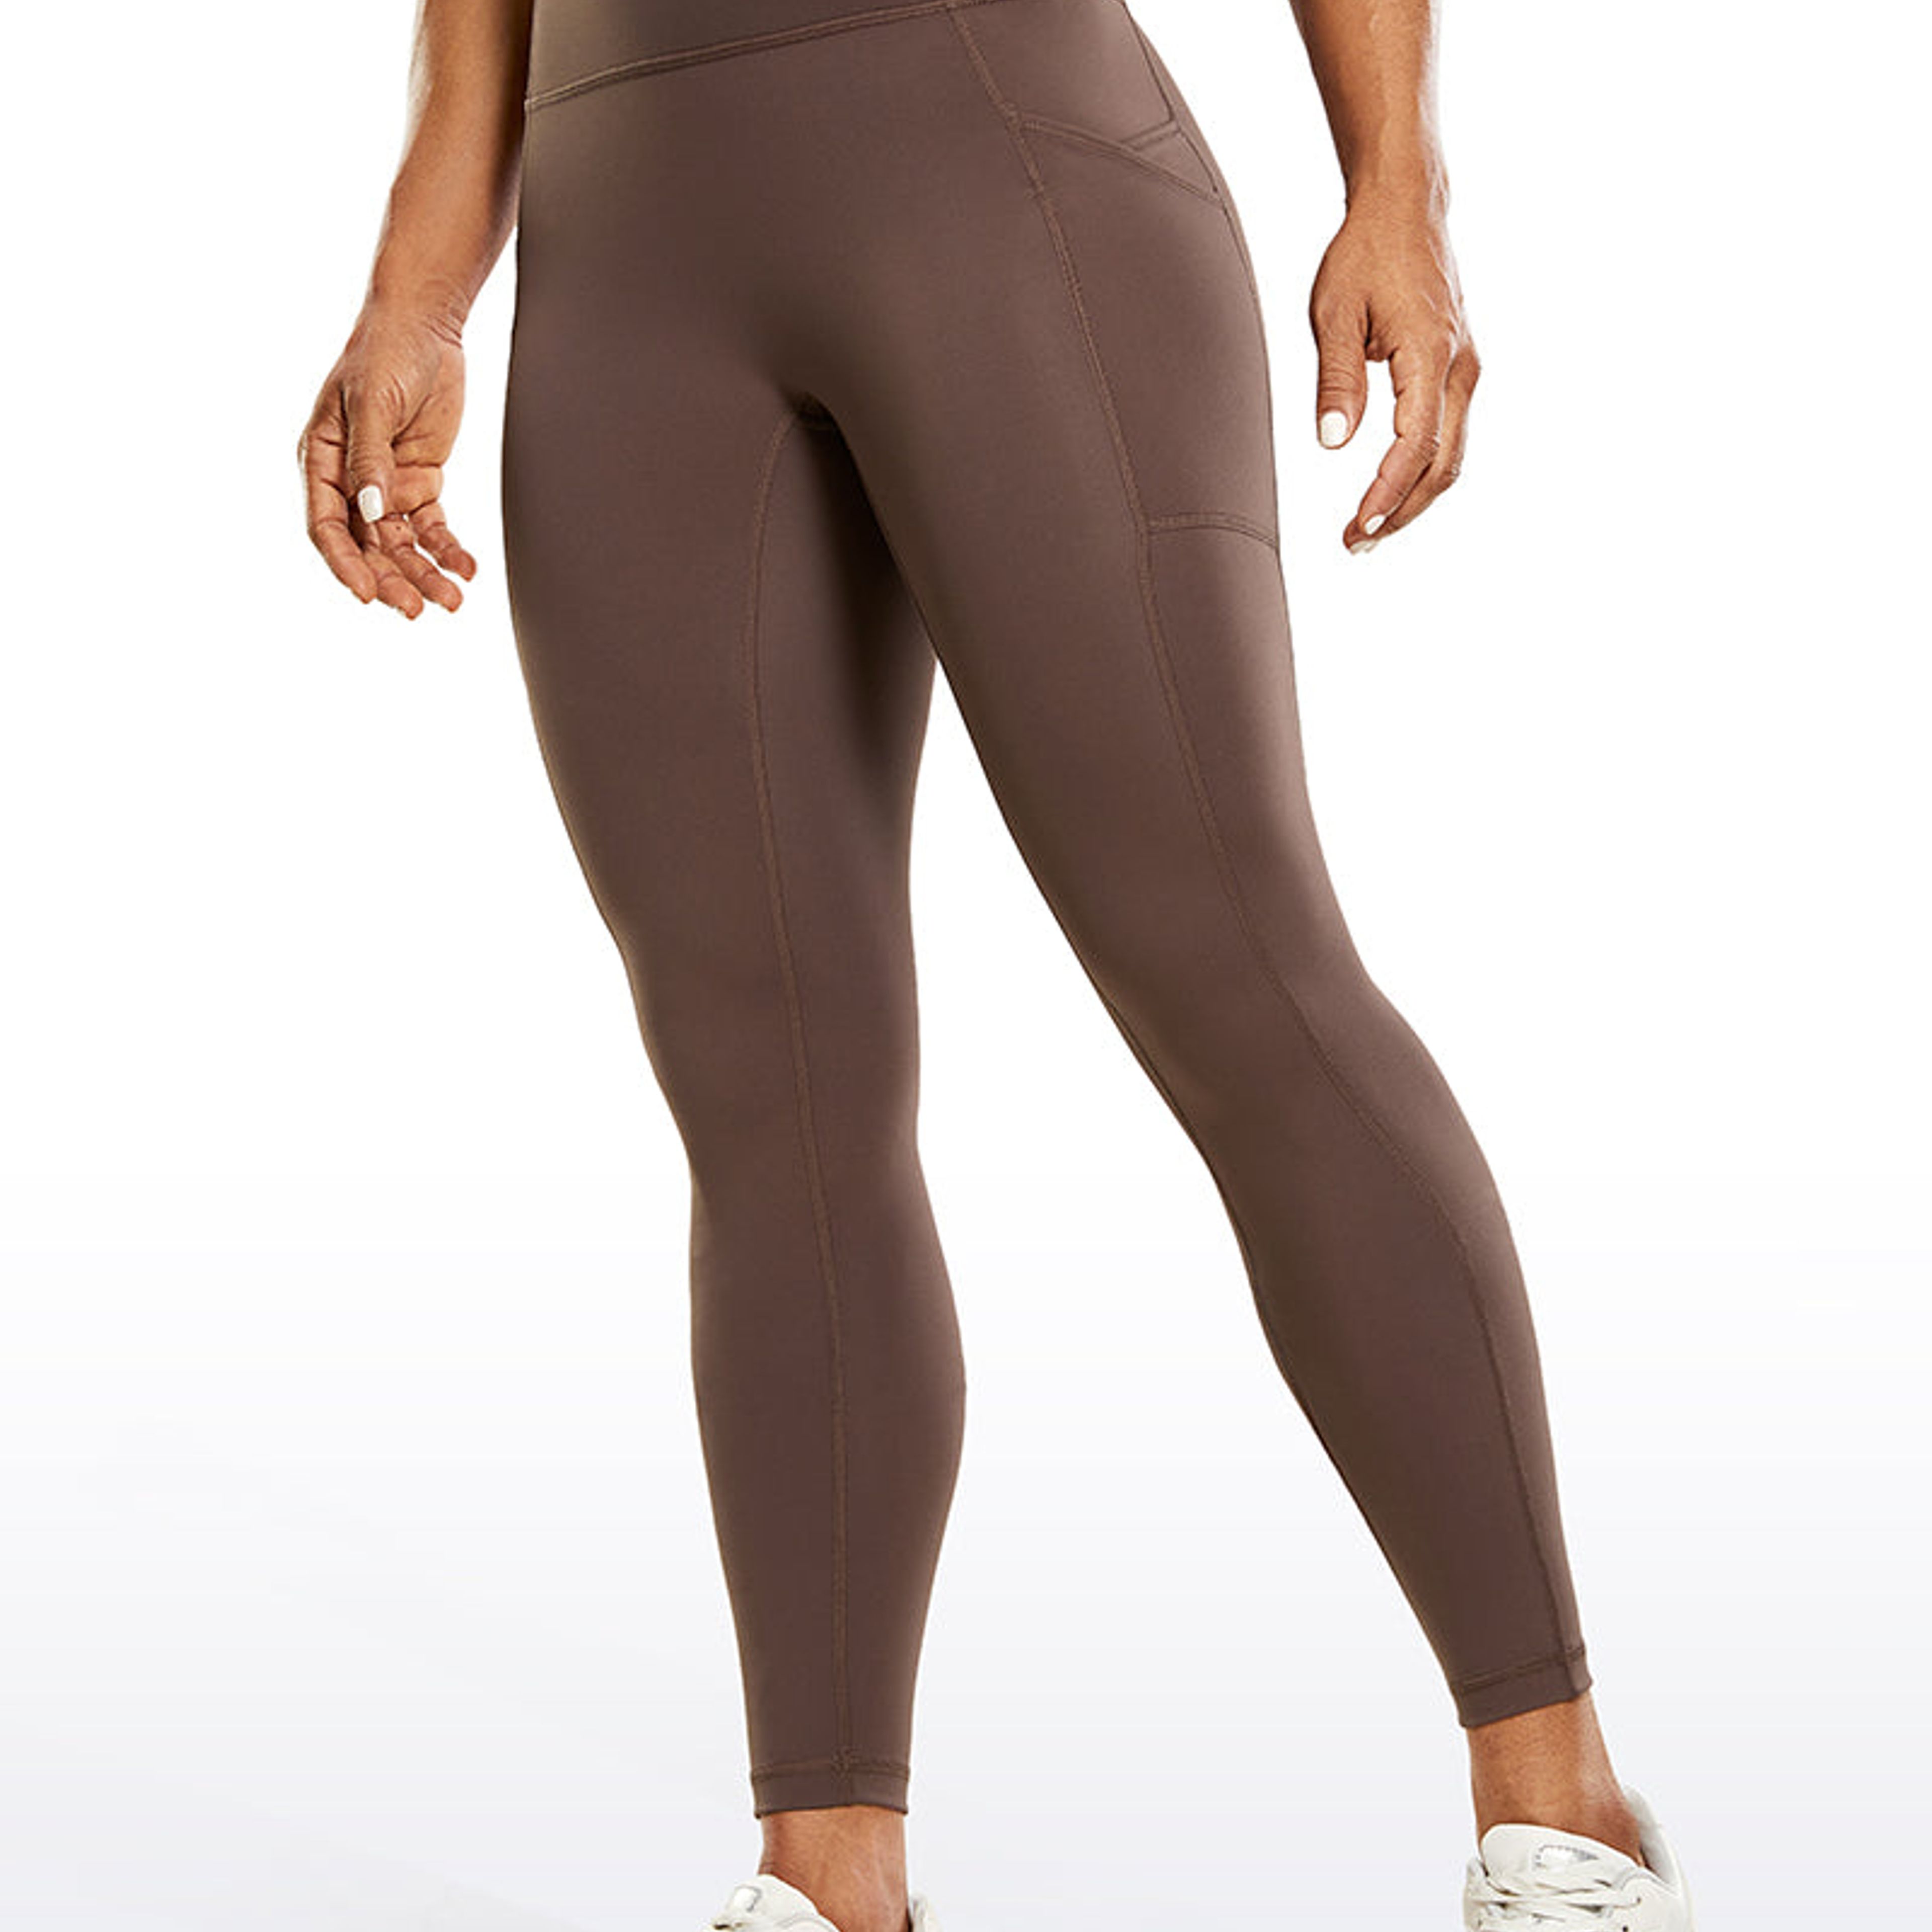 Buy CRZ YOGA Women's Ulti-Dry Workout Leggings 25 Inches